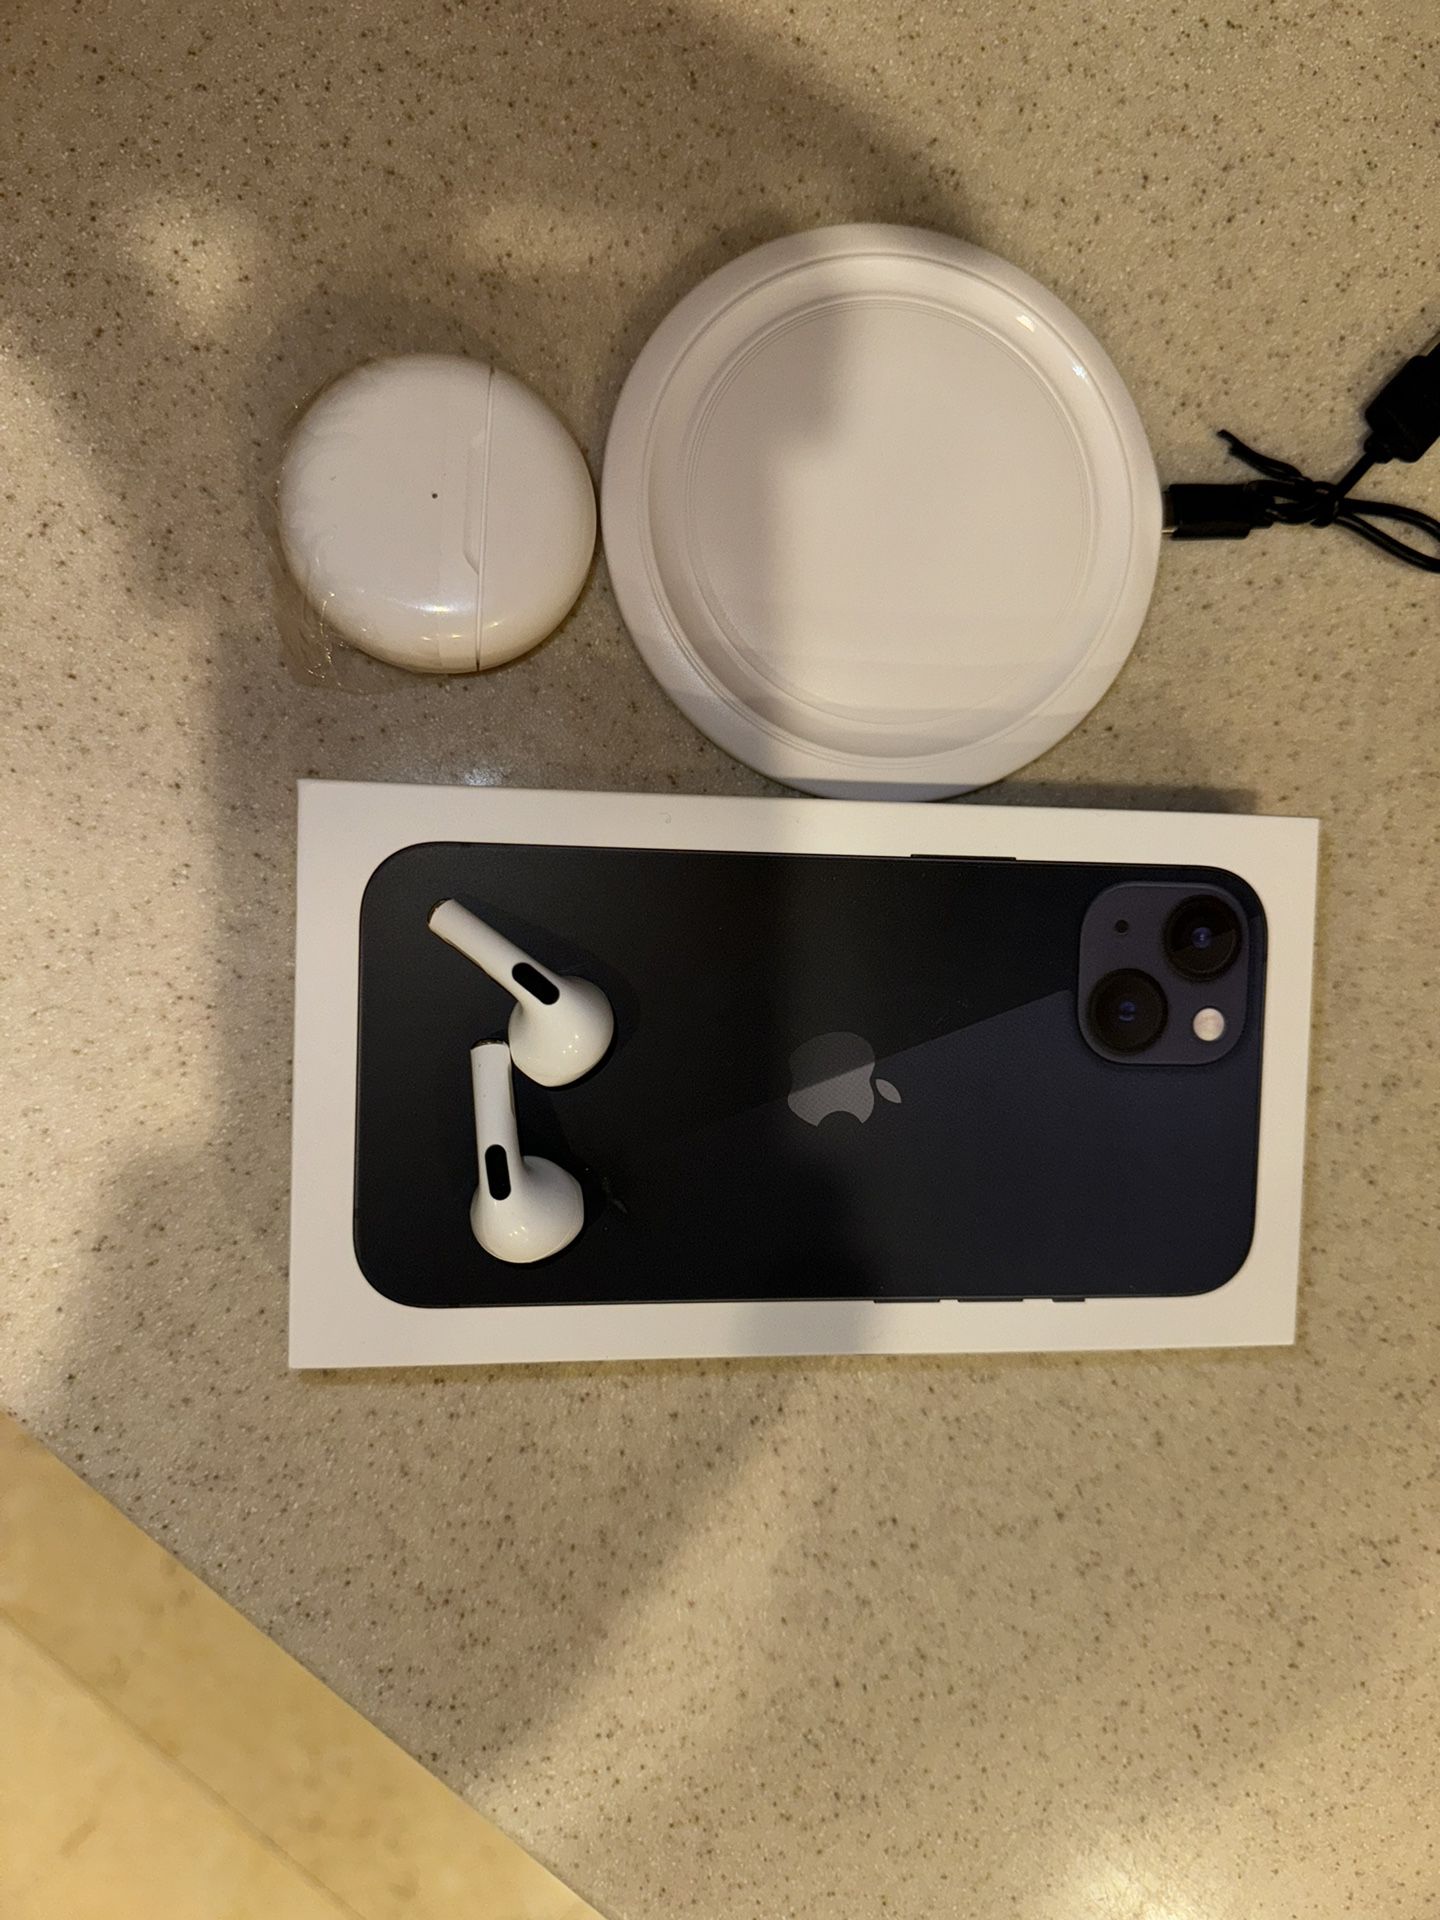 iPhone 11 New MetroPCS With Wireless Charger And Earbuds 